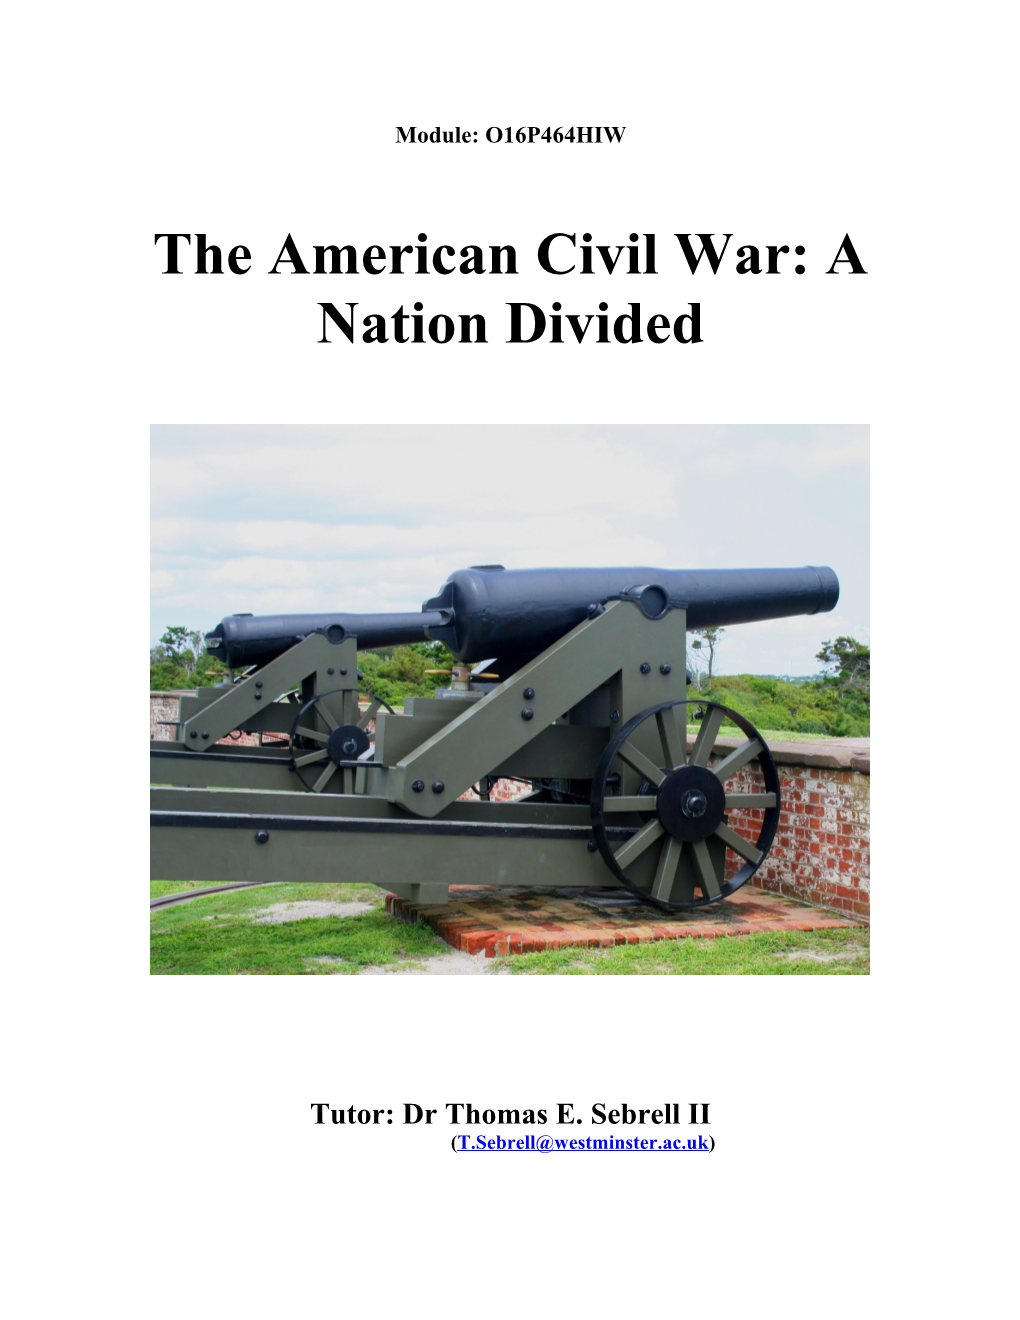 The American Civil War: a Nation Divided